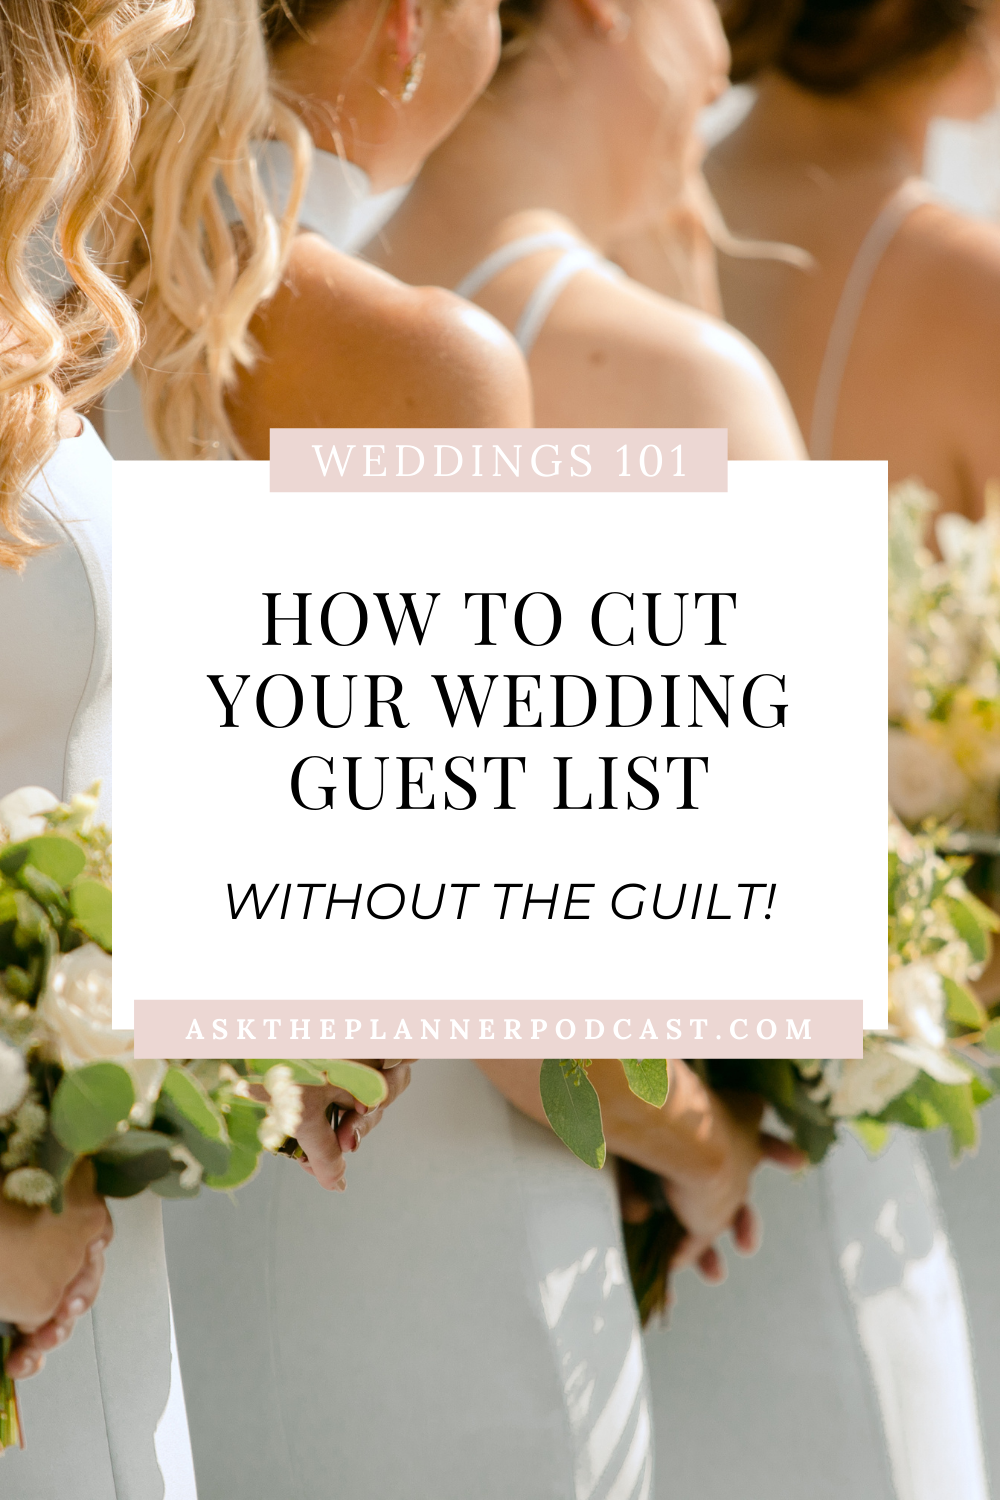 EP 40 VERVE How to cut your wedding guest list 